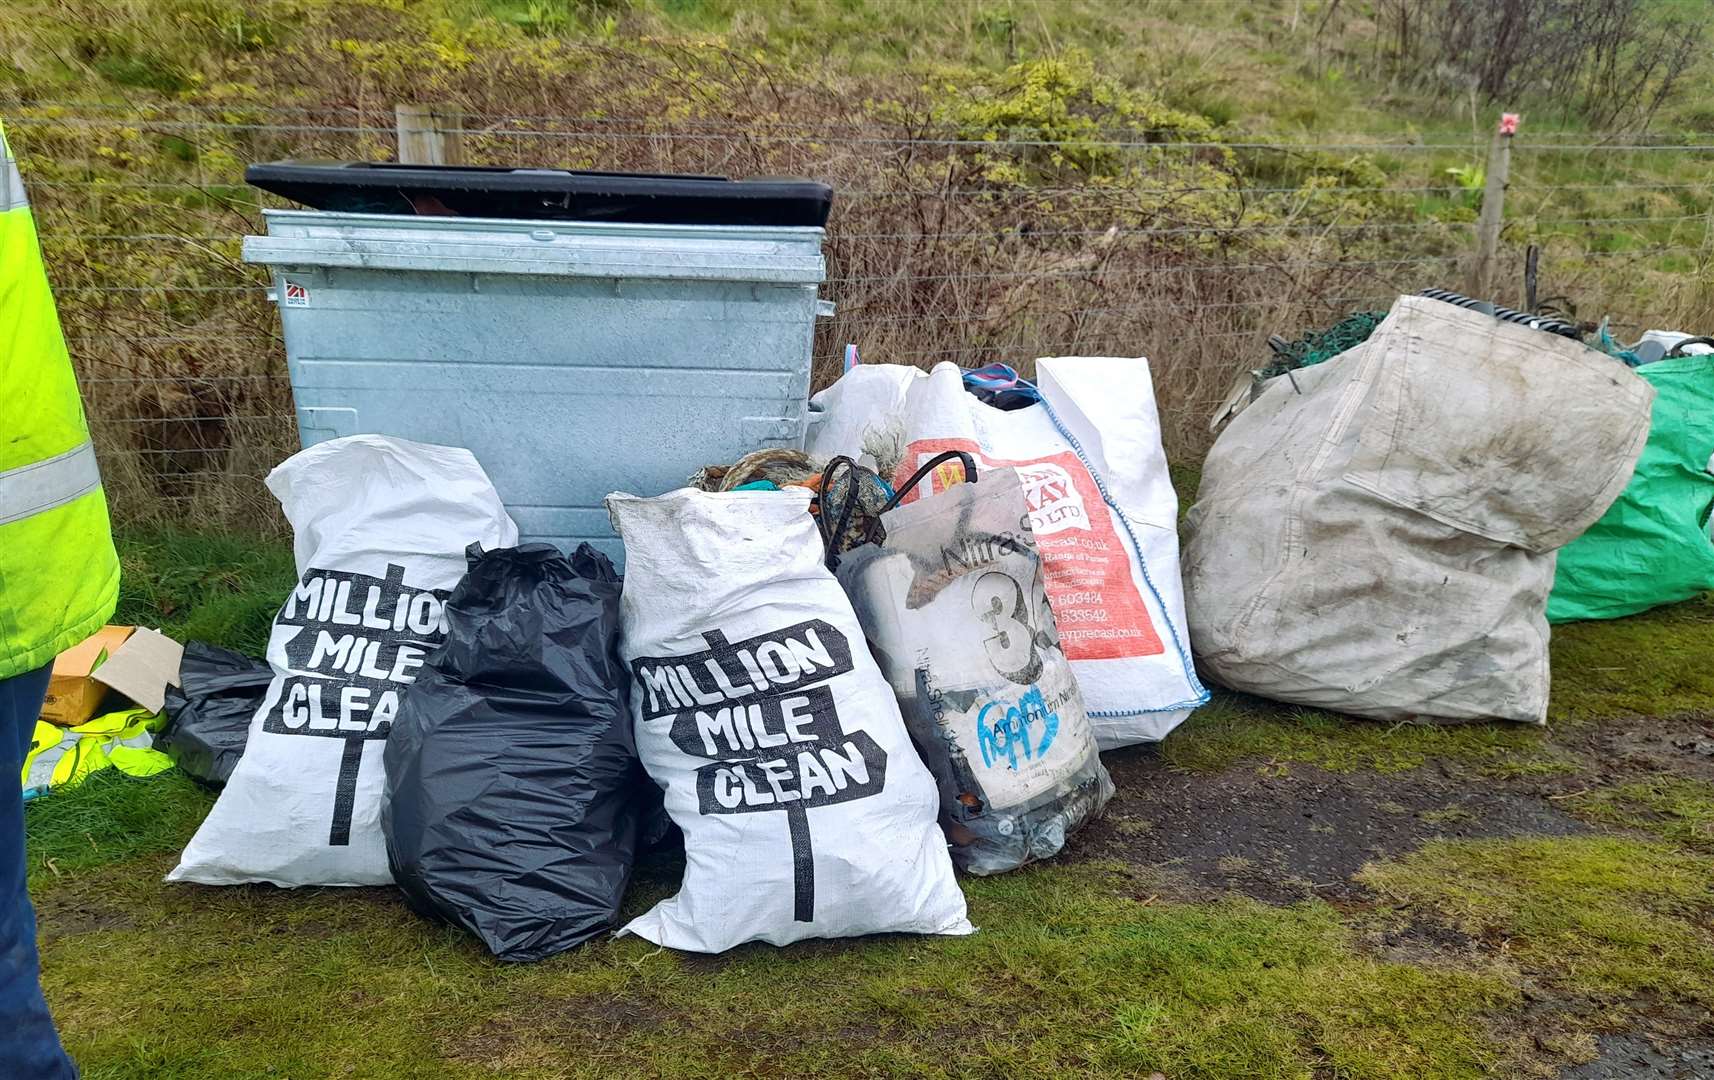 More of the bags sit ready to be picked up. There were 115 bags picked up in total. Picture: Caithness Beach Cleans